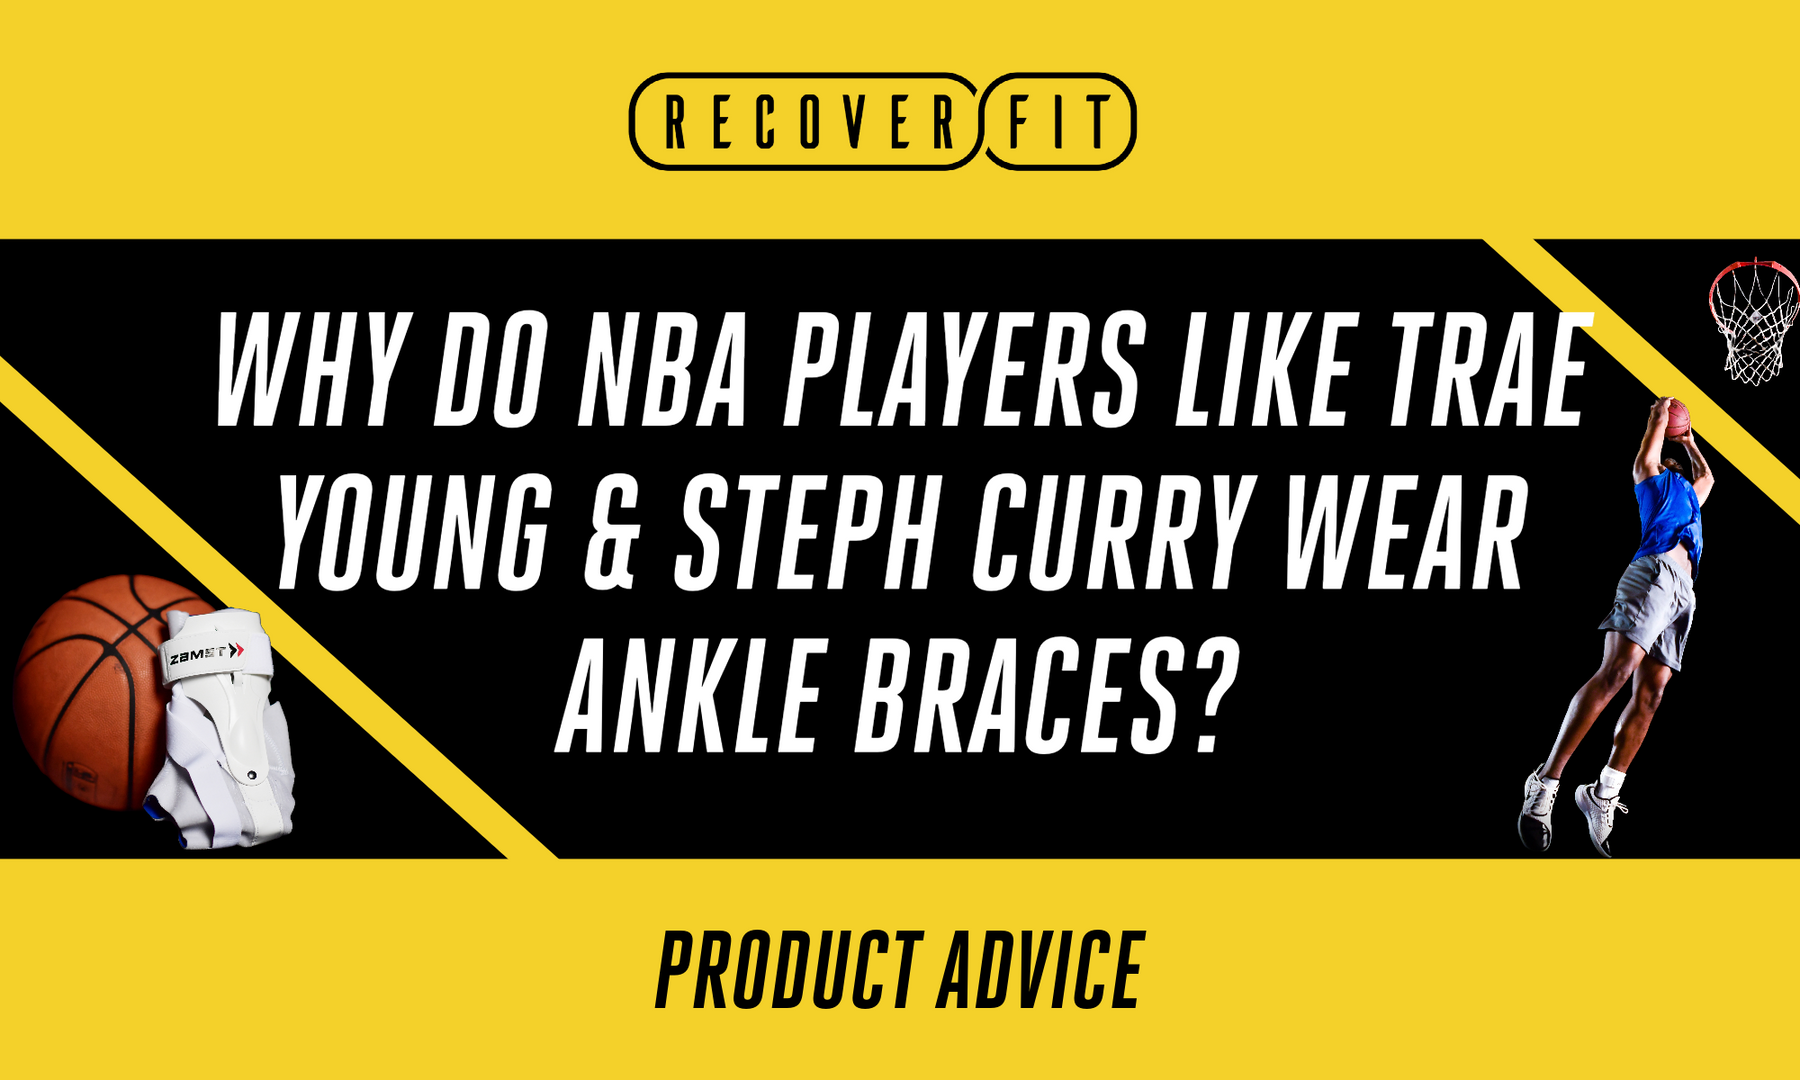 Why do NBA players like Trae Young and Steph Curry wear Ankle Braces?